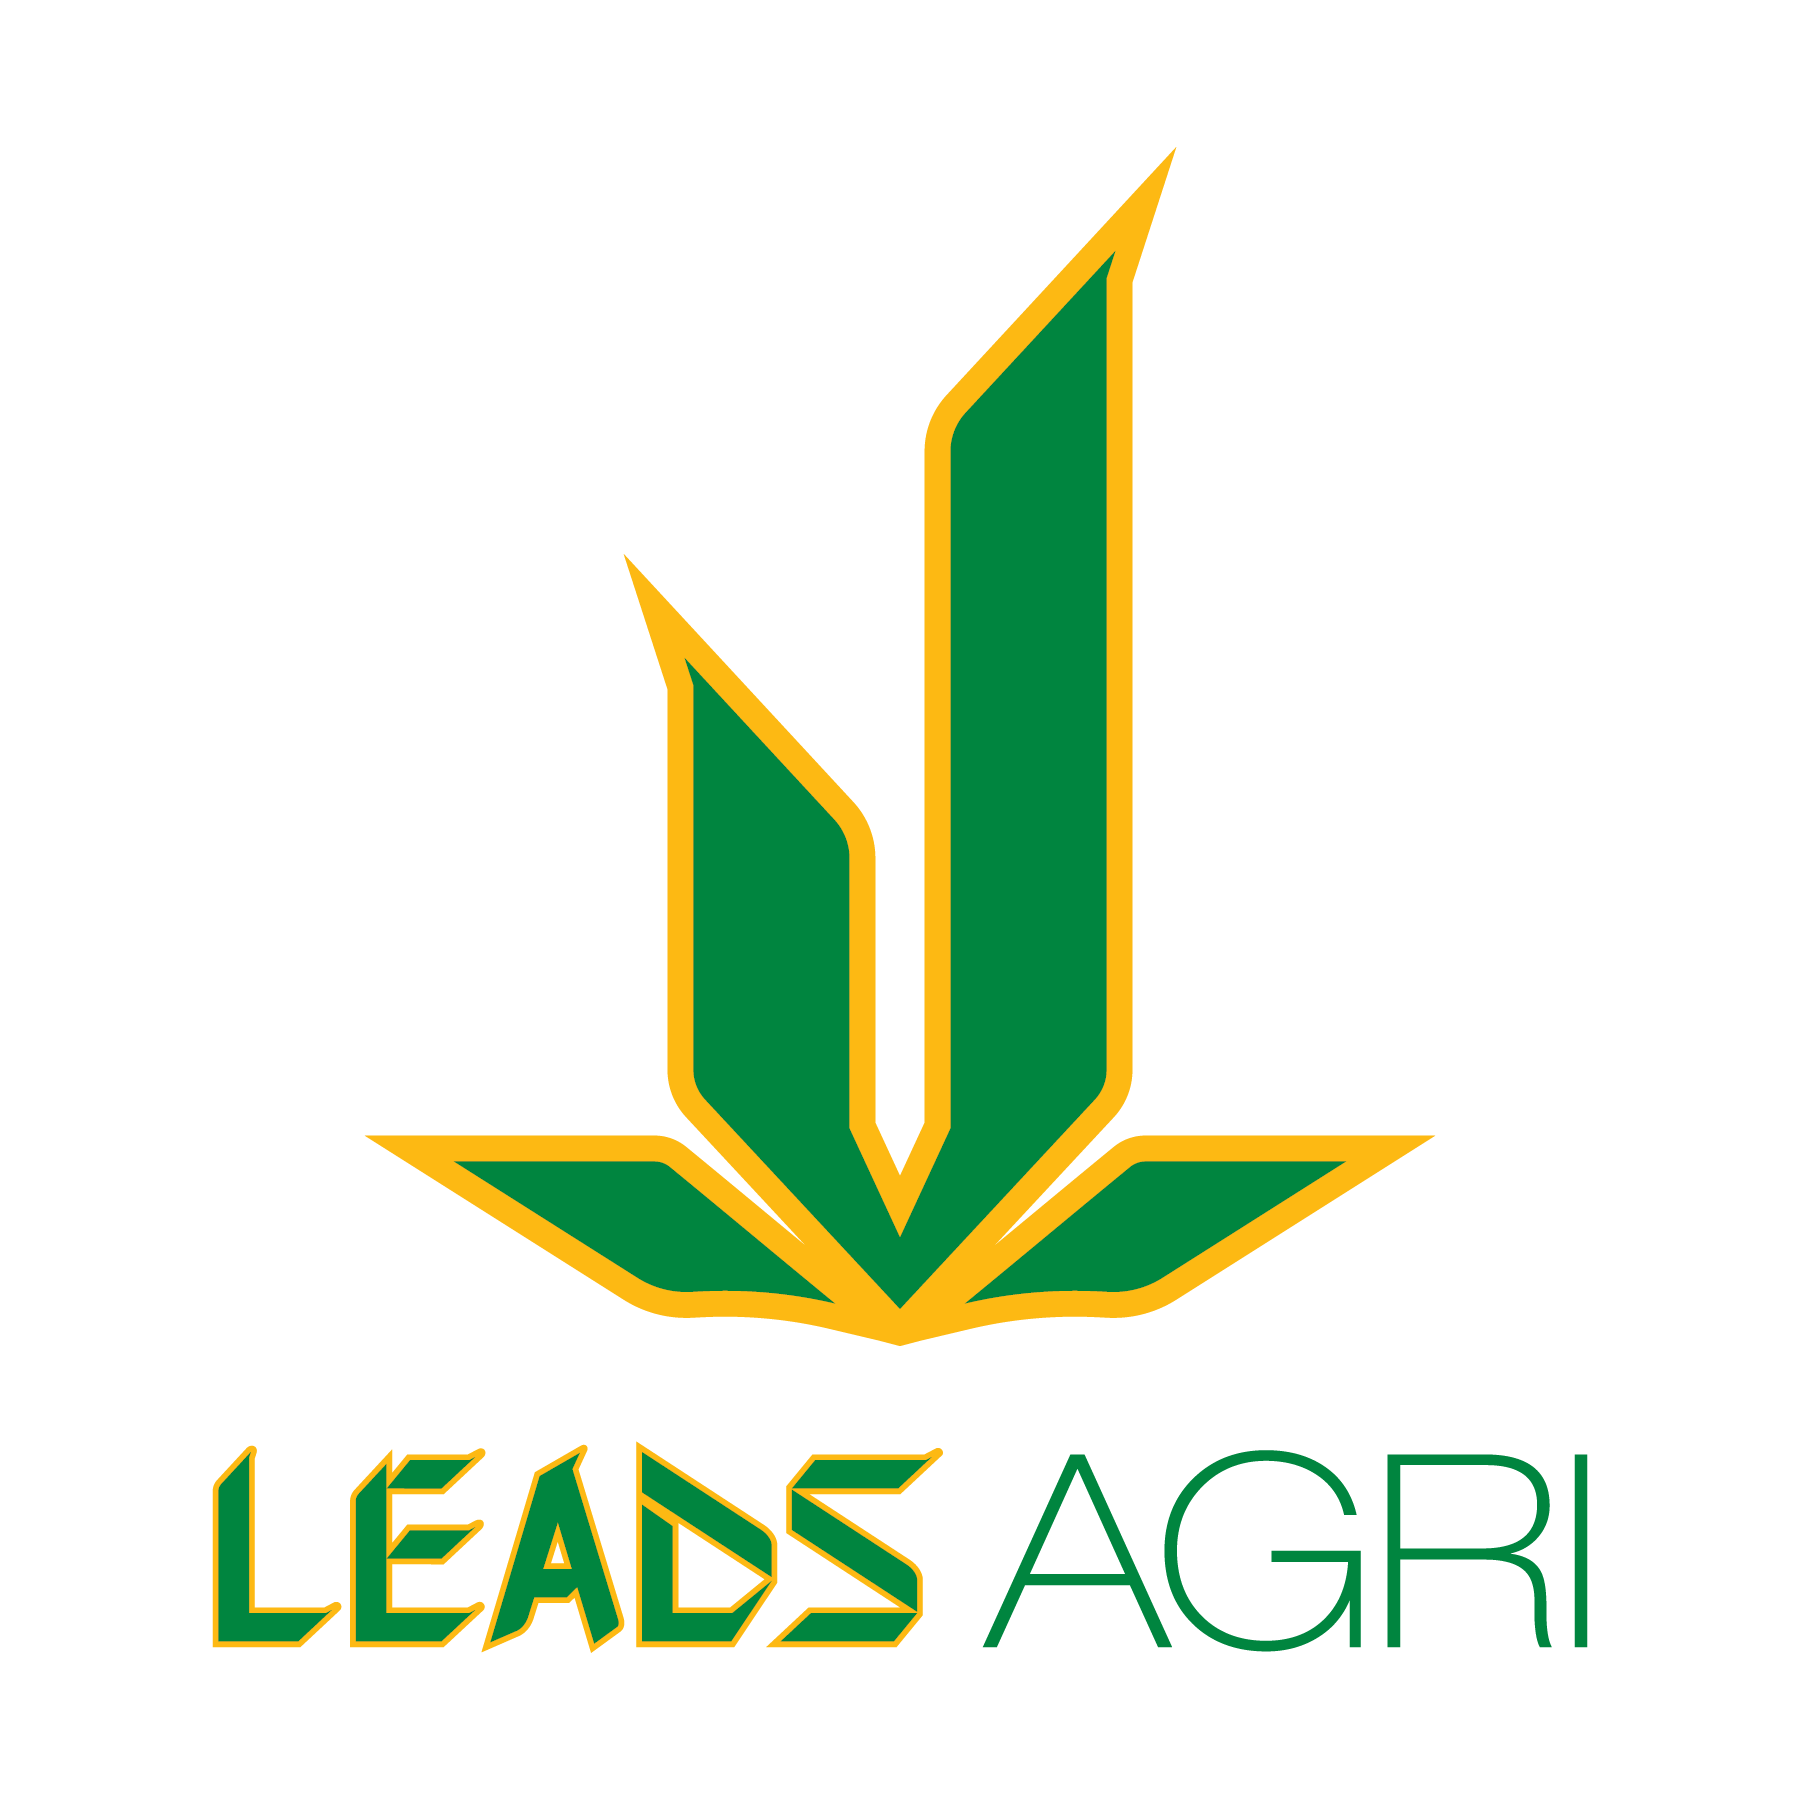 LEADS Agricultural Products Corporation Logo - Vertical (1)